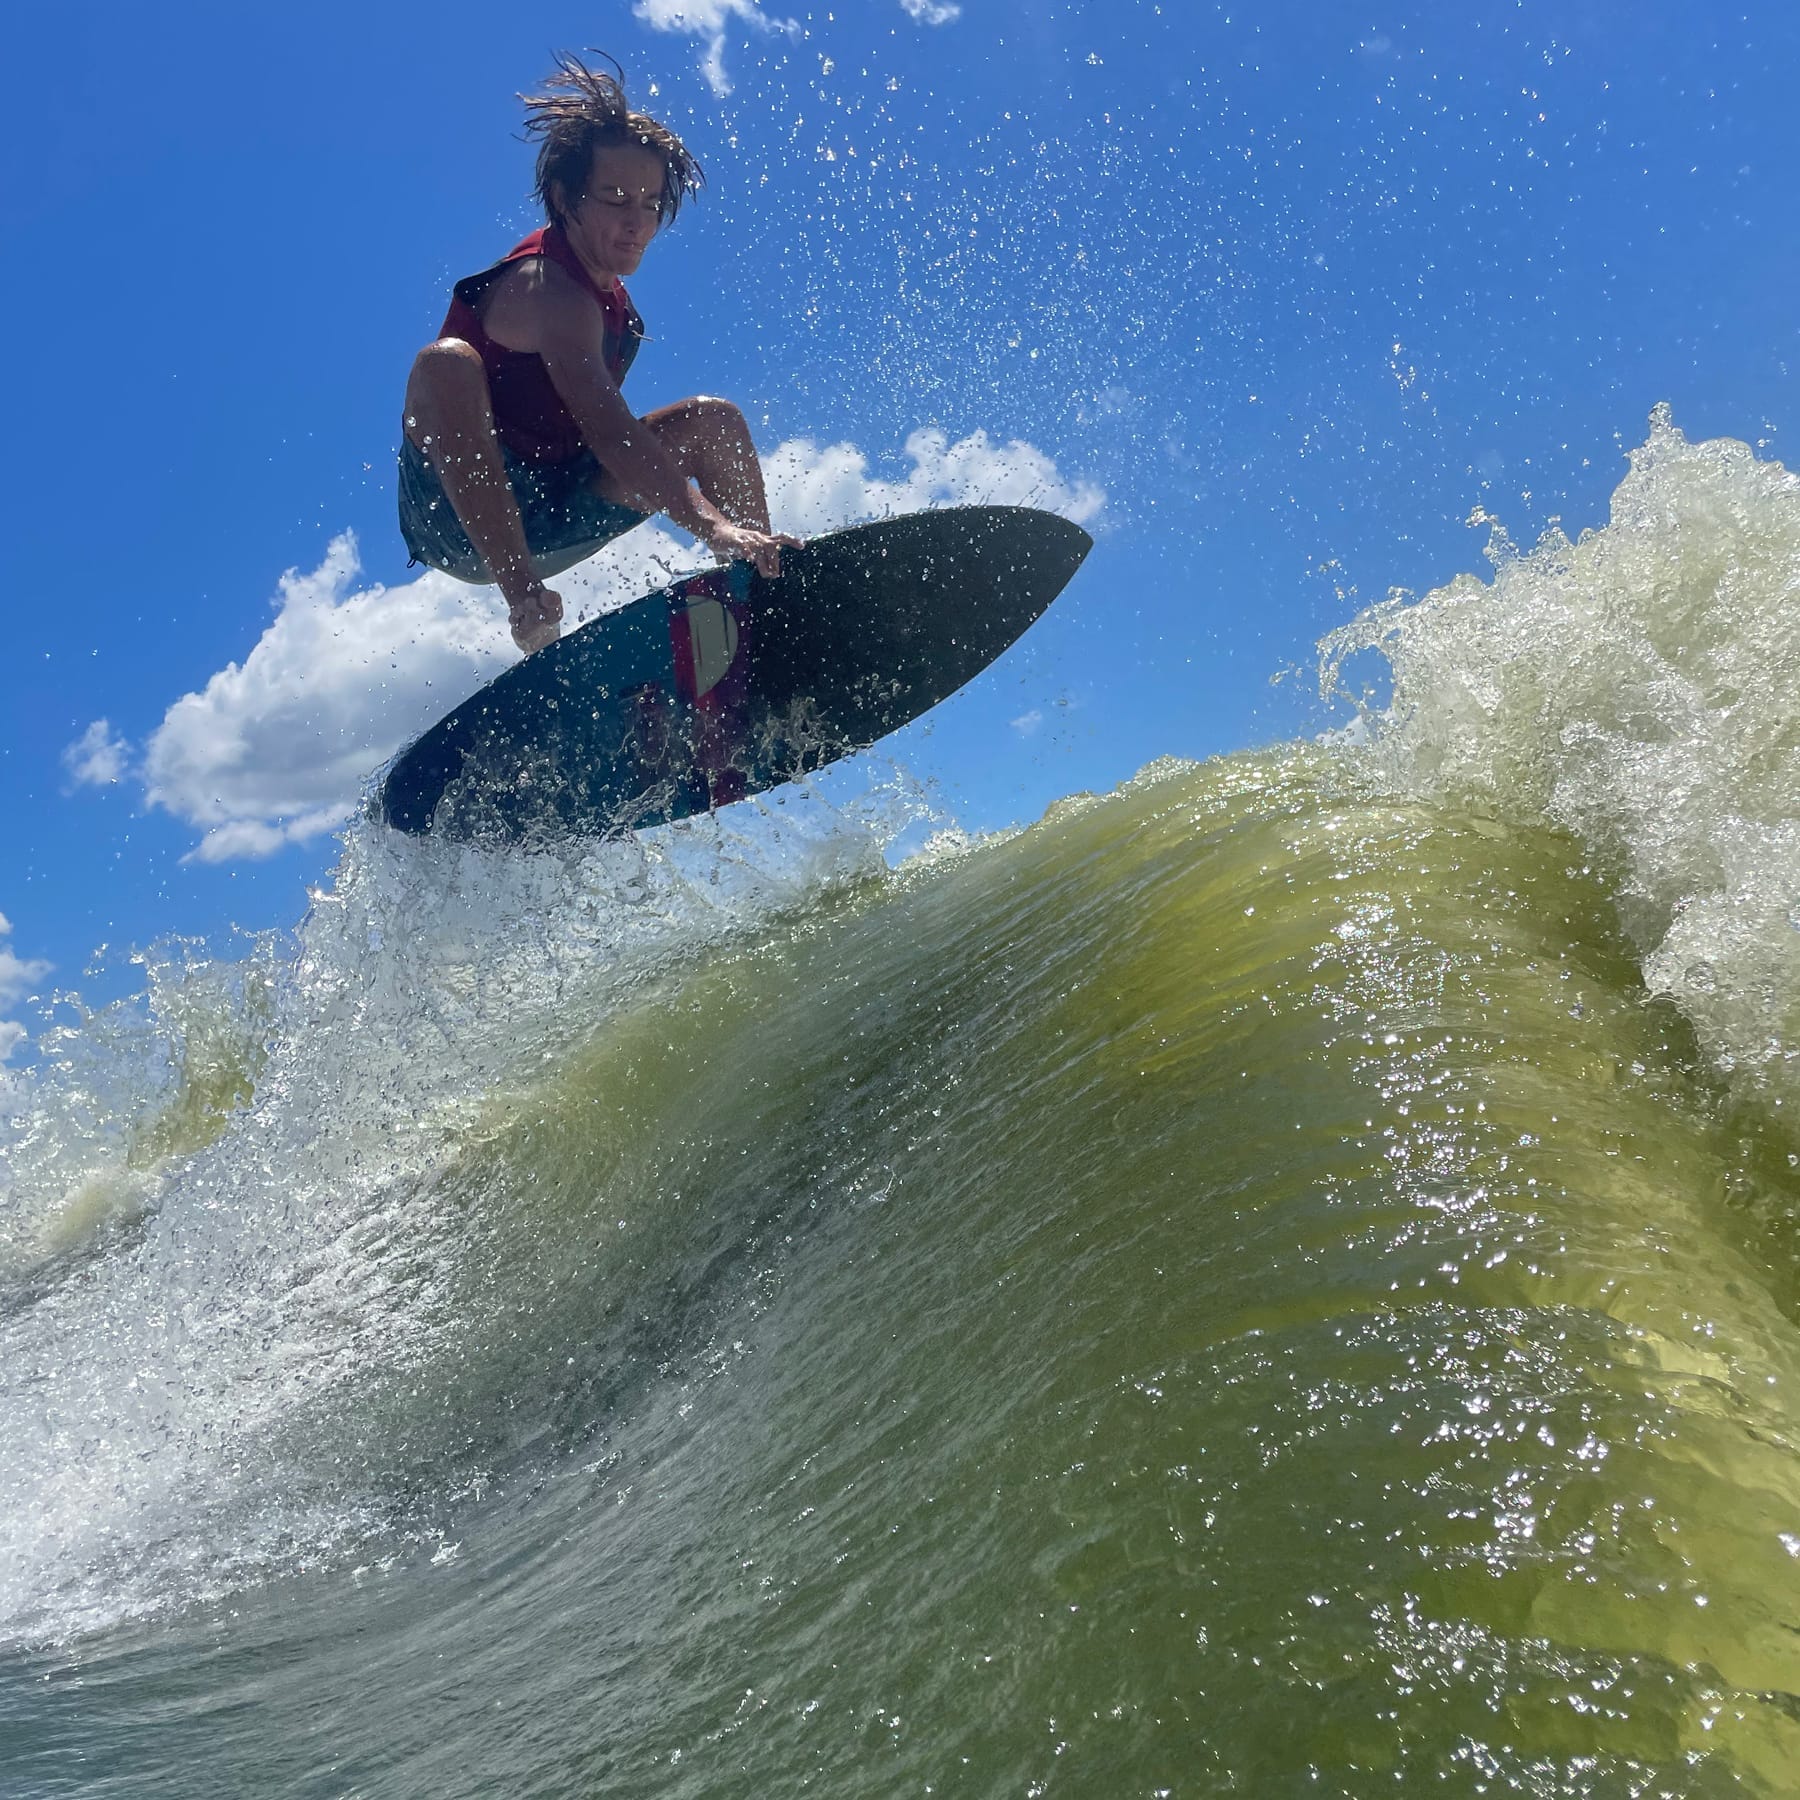 A young man riding a wave on a surfboard.